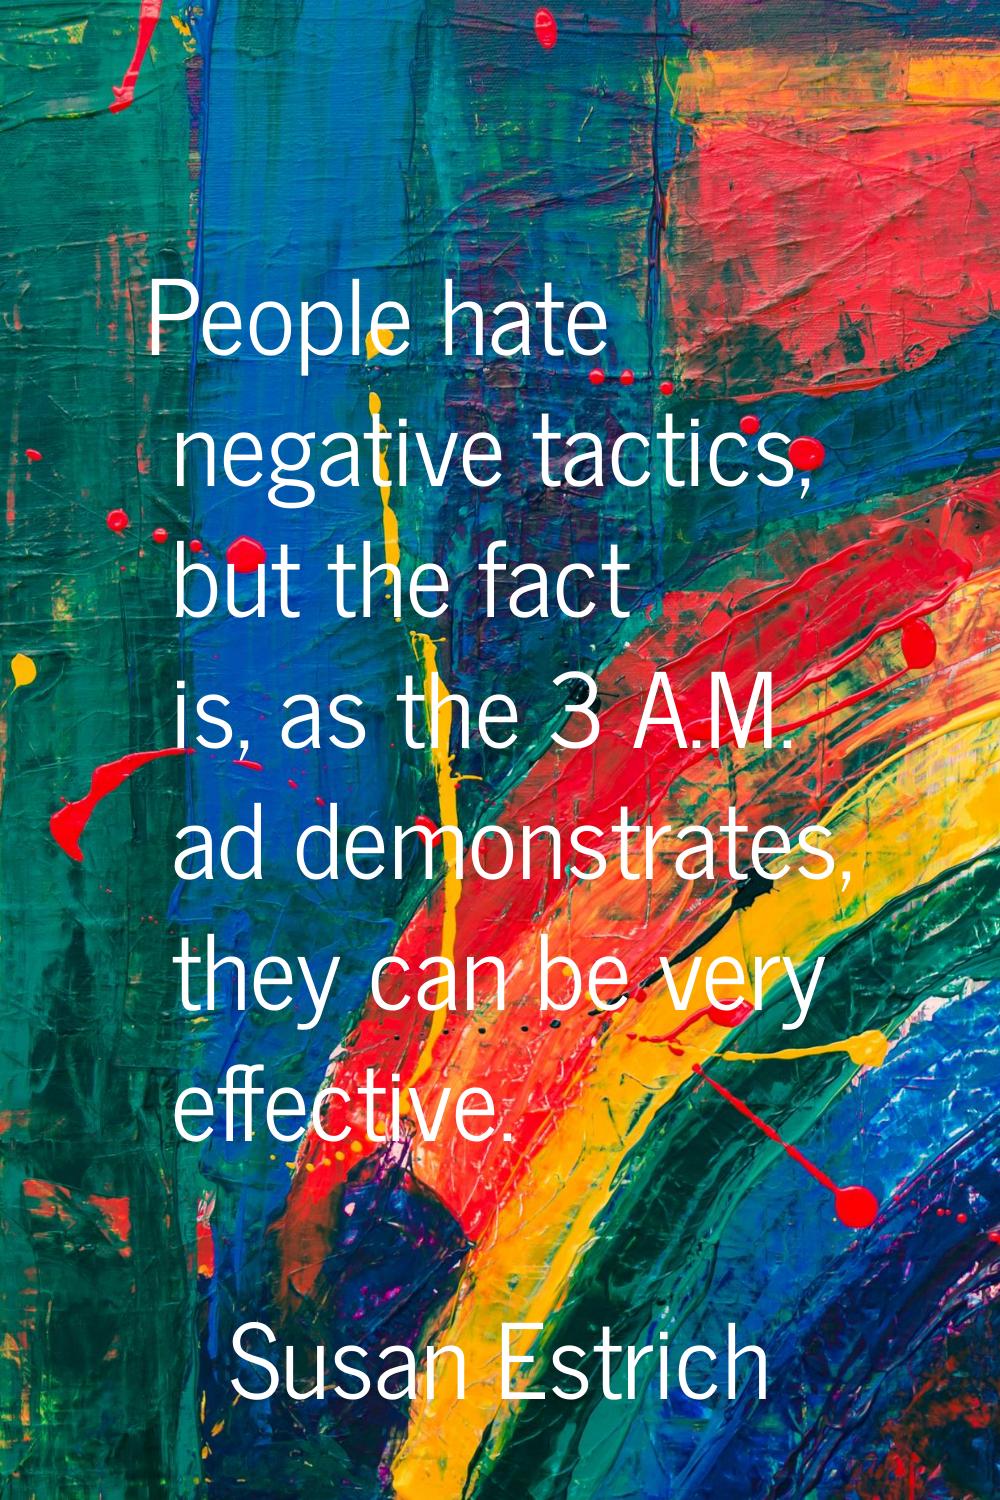 People hate negative tactics, but the fact is, as the 3 A.M. ad demonstrates, they can be very effe